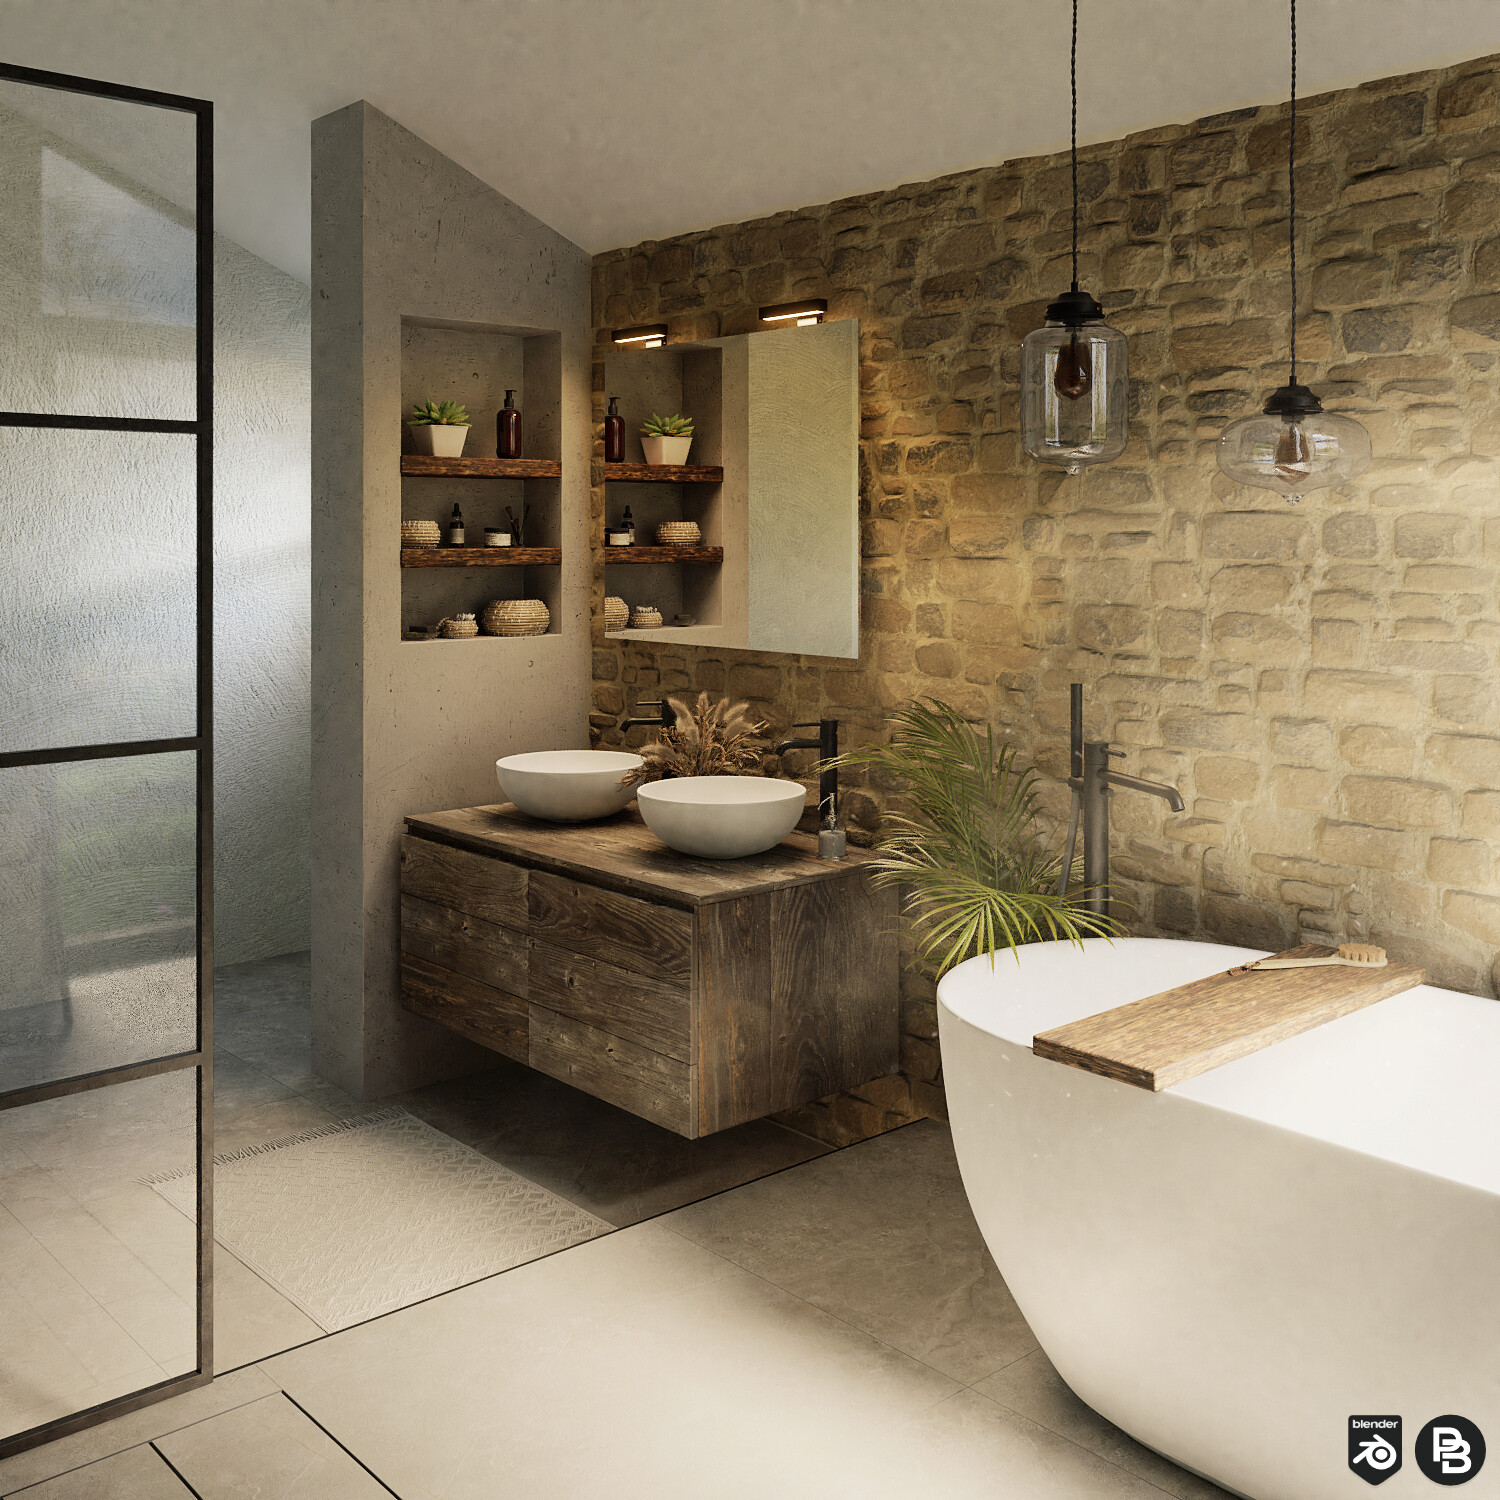 Bathrooms, Works in stone